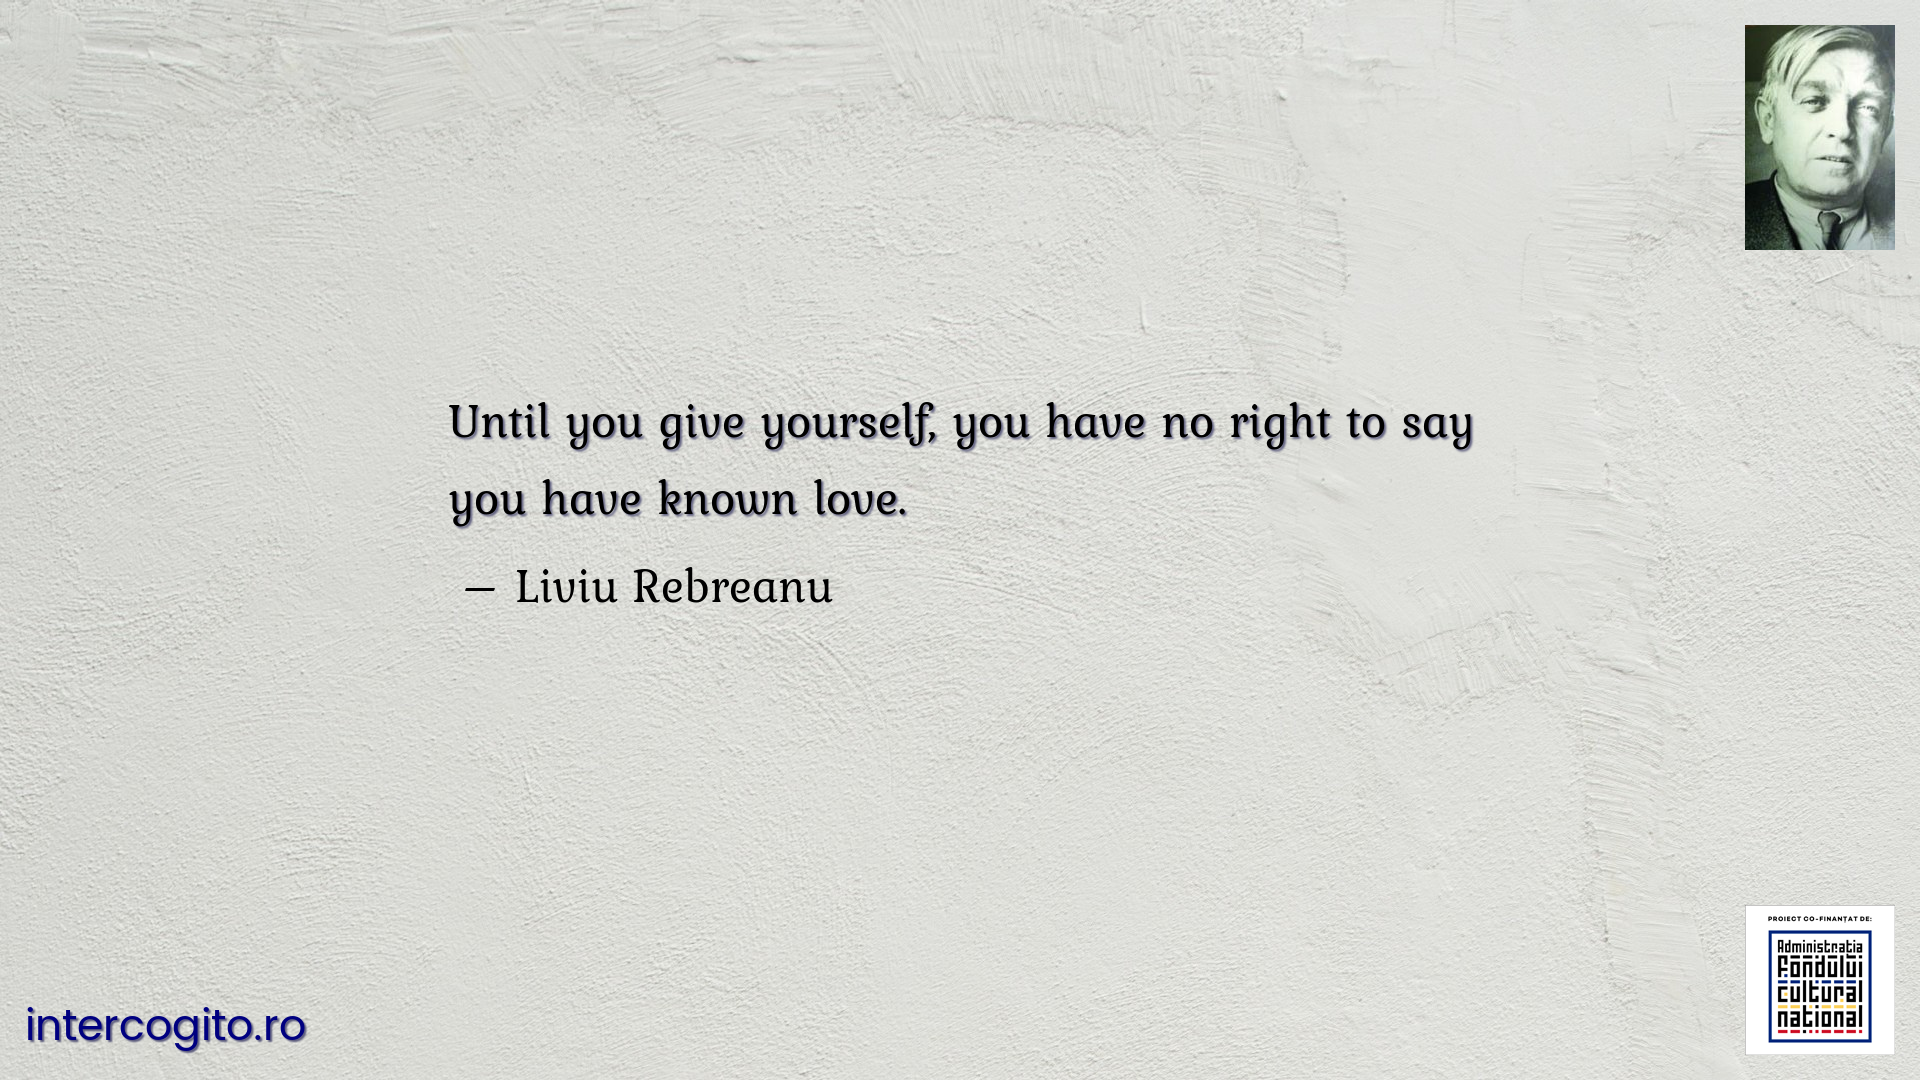 Until you give yourself, you have no right to say you have known love.